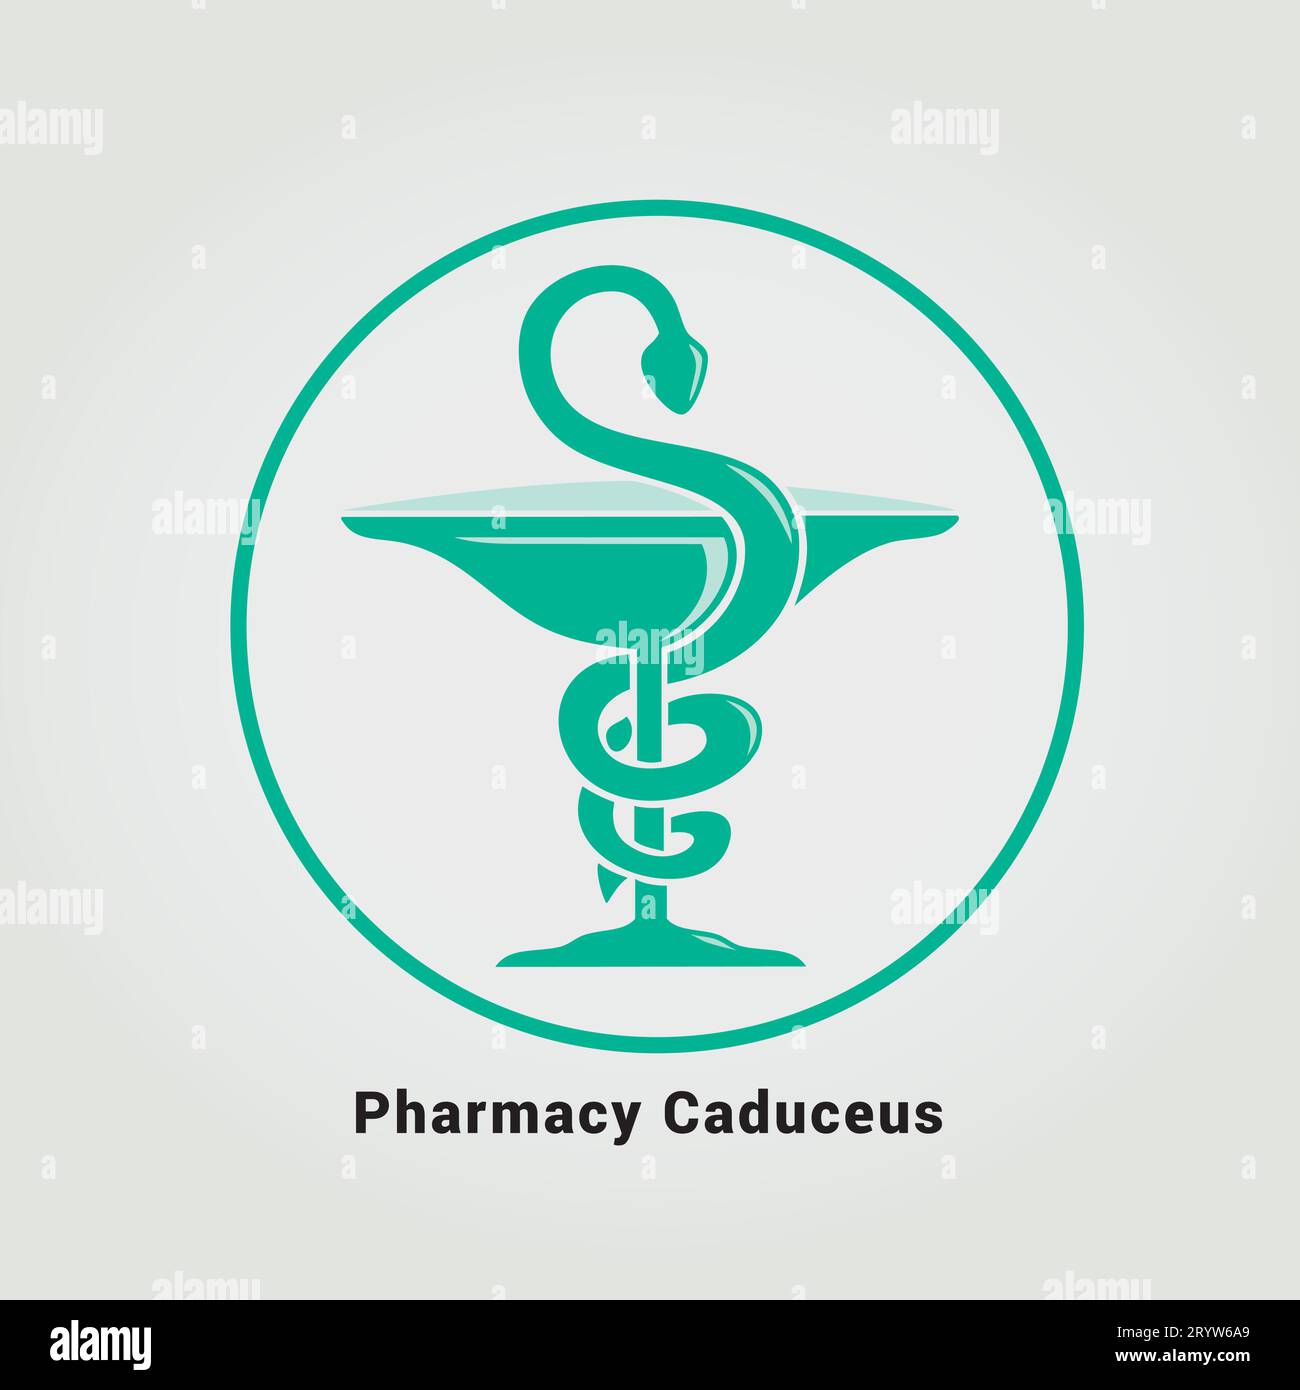 Pharmacy Caduceus Symbol Icon Design Medical Health Clinic Care Doctor Hospital Industry Snake Symbol Illustration Vector Circle Design Brand Various Stock Vector